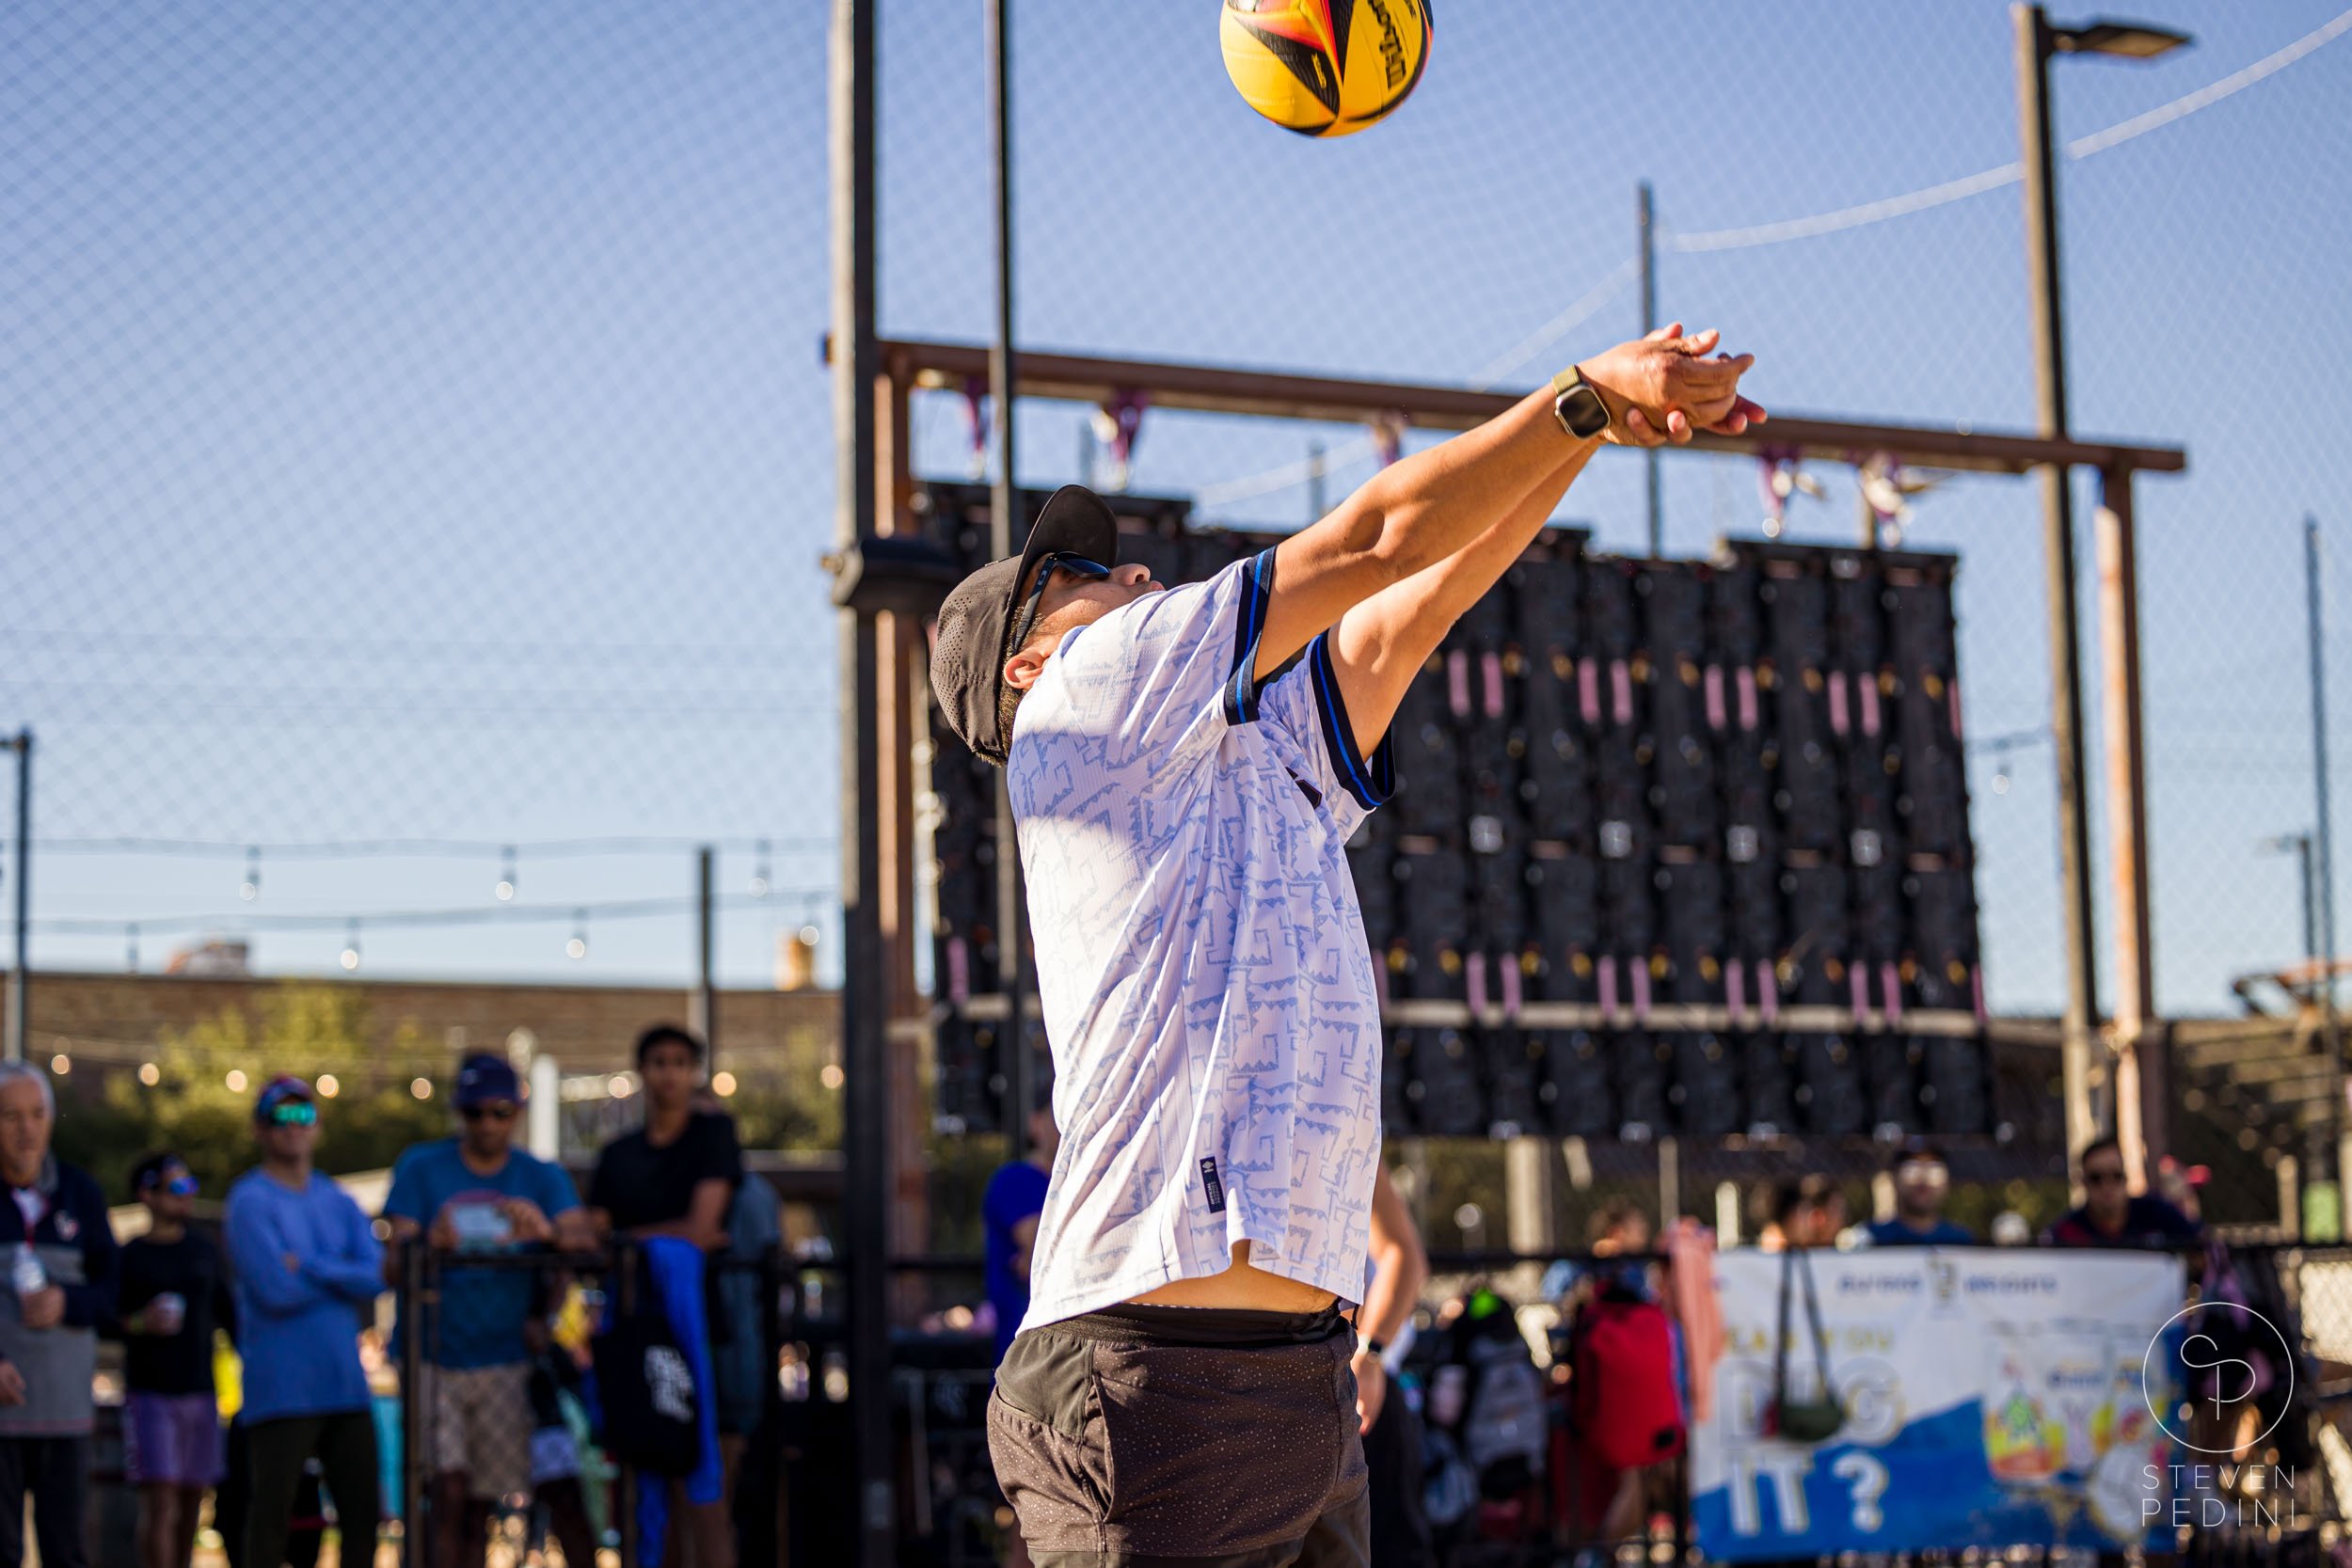 Steven Pedini Photography - Bumpy Pickle - Sand Volleyball - Houston TX - World Cup of Volleyball - 00081.jpg